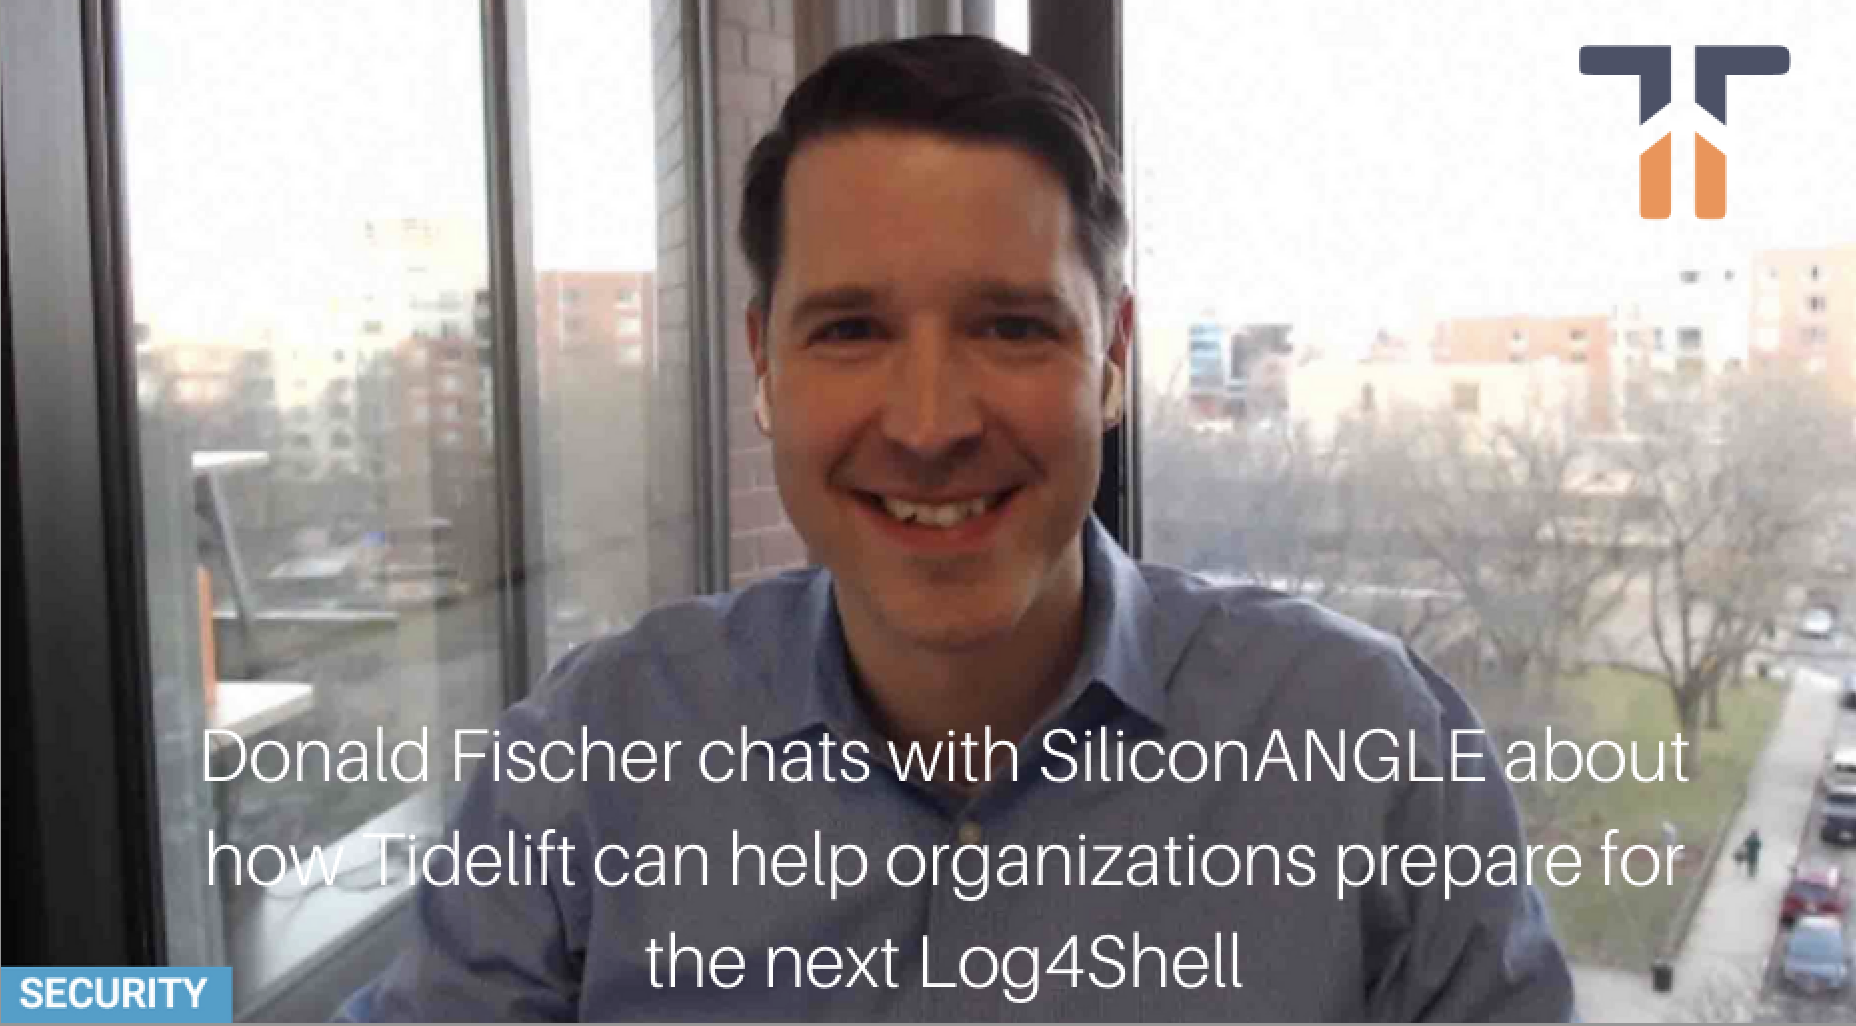 Donald Fischer chats with SiliconANGLE about how Tidelift can help organizations prepare for the next Log4Shell